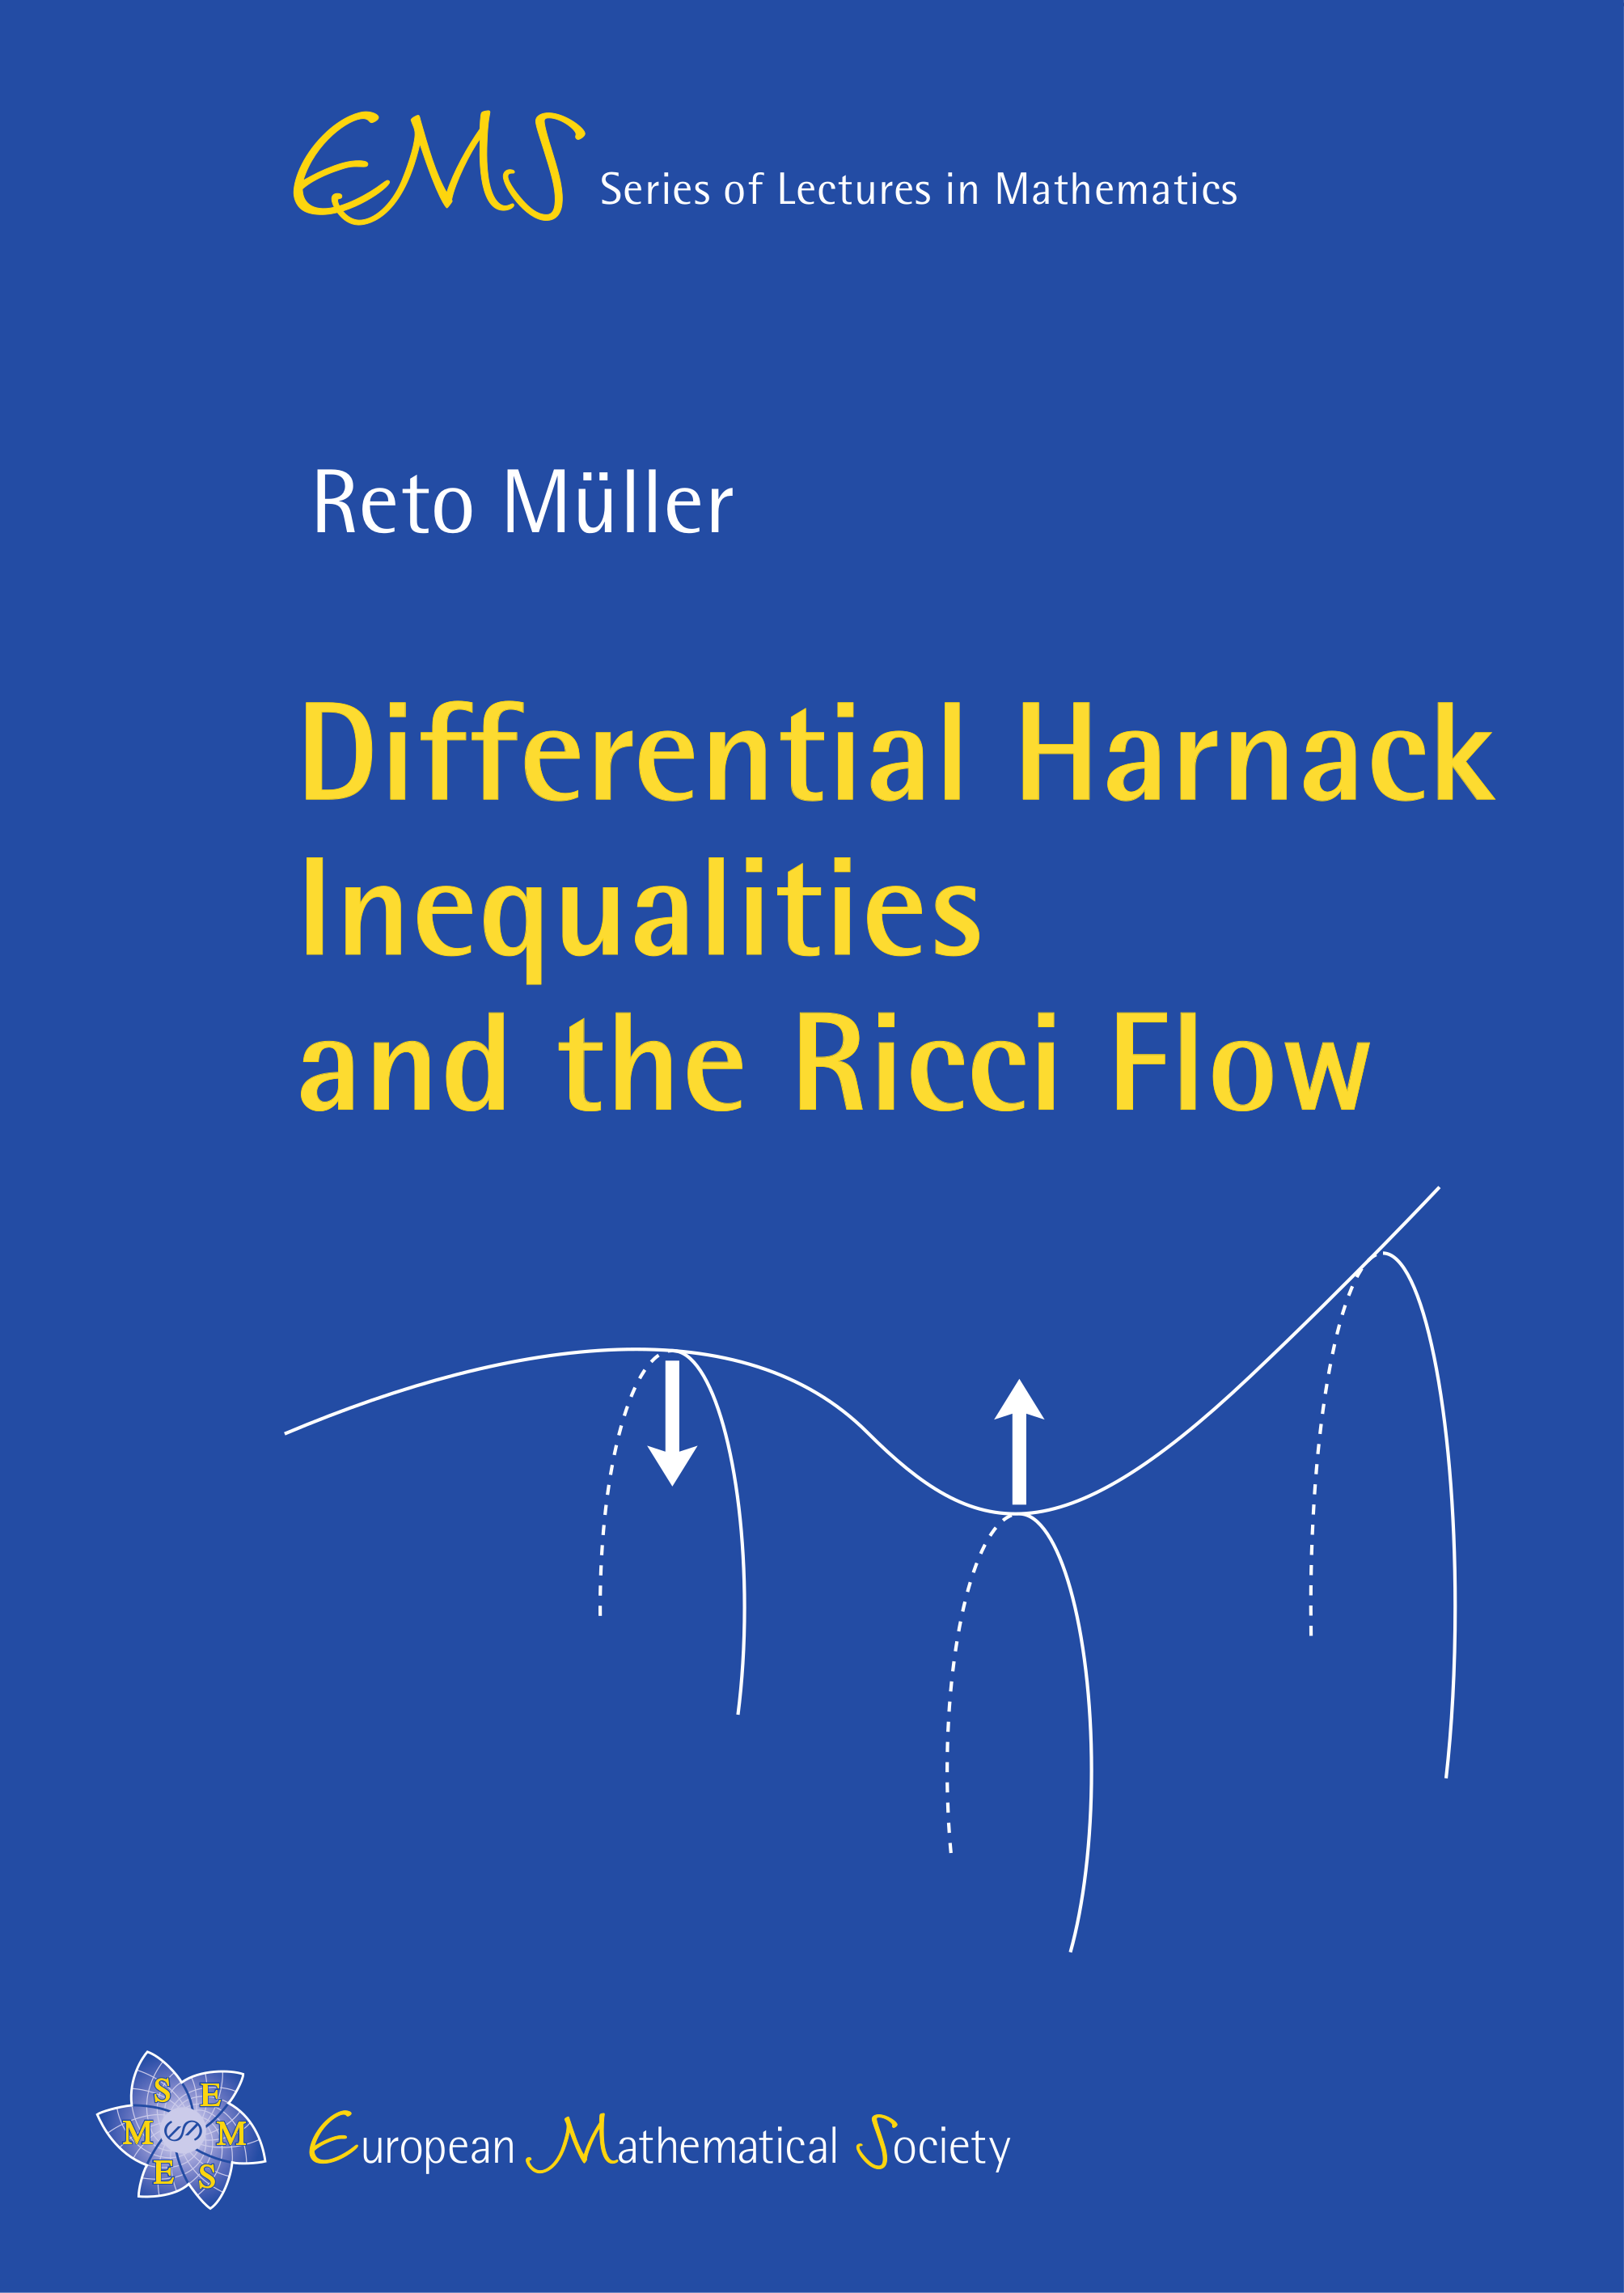 Differential Harnack inequalities cover